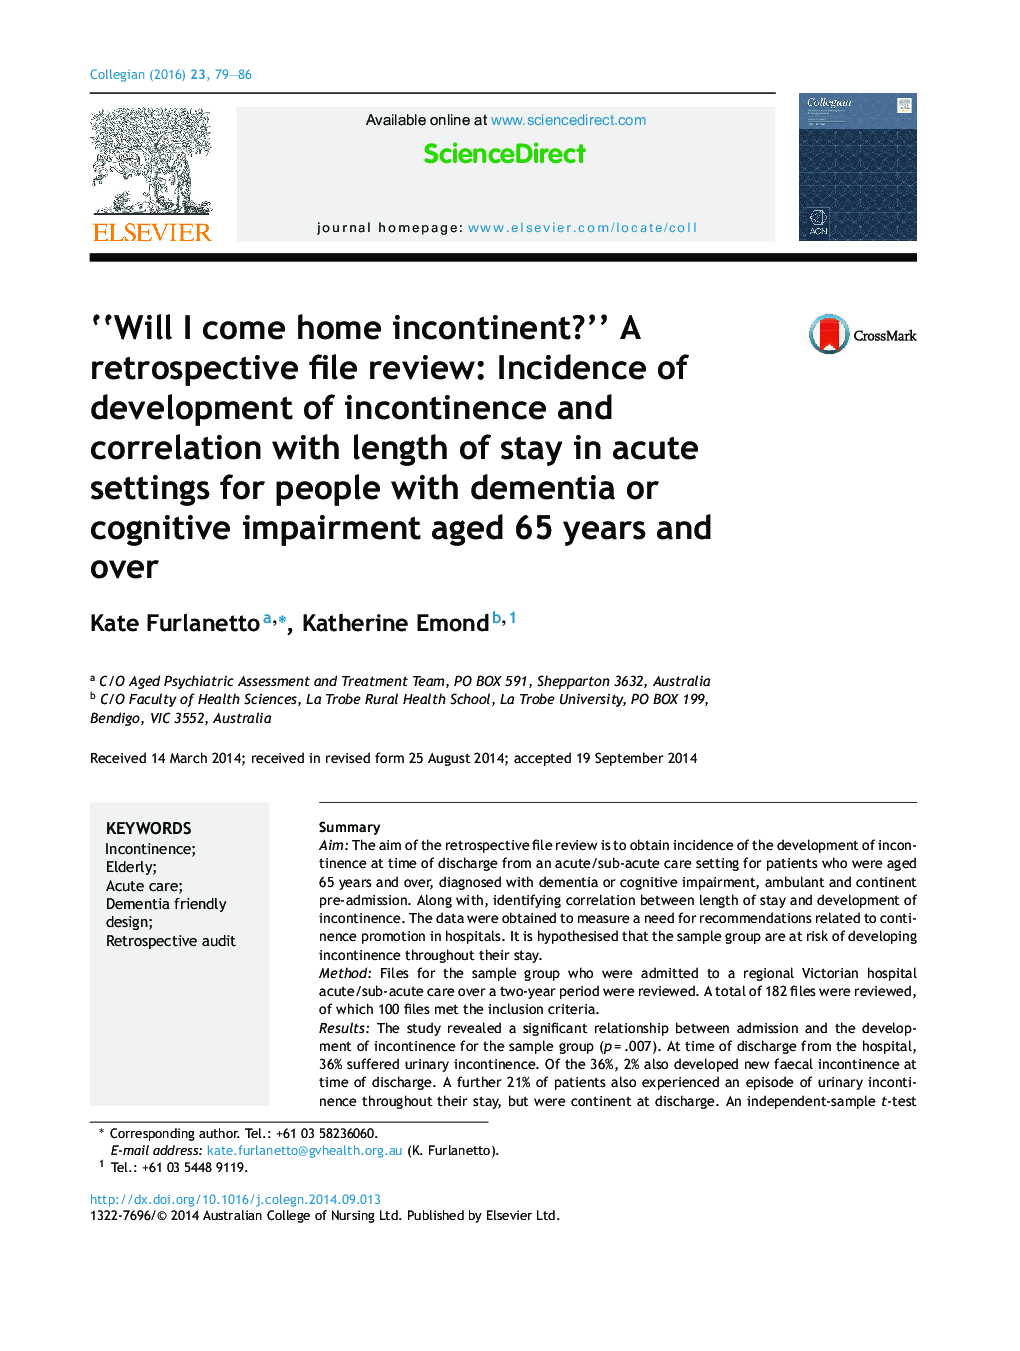 “Will I come home incontinent?” A retrospective file review: Incidence of development of incontinence and correlation with length of stay in acute settings for people with dementia or cognitive impairment aged 65 years and over